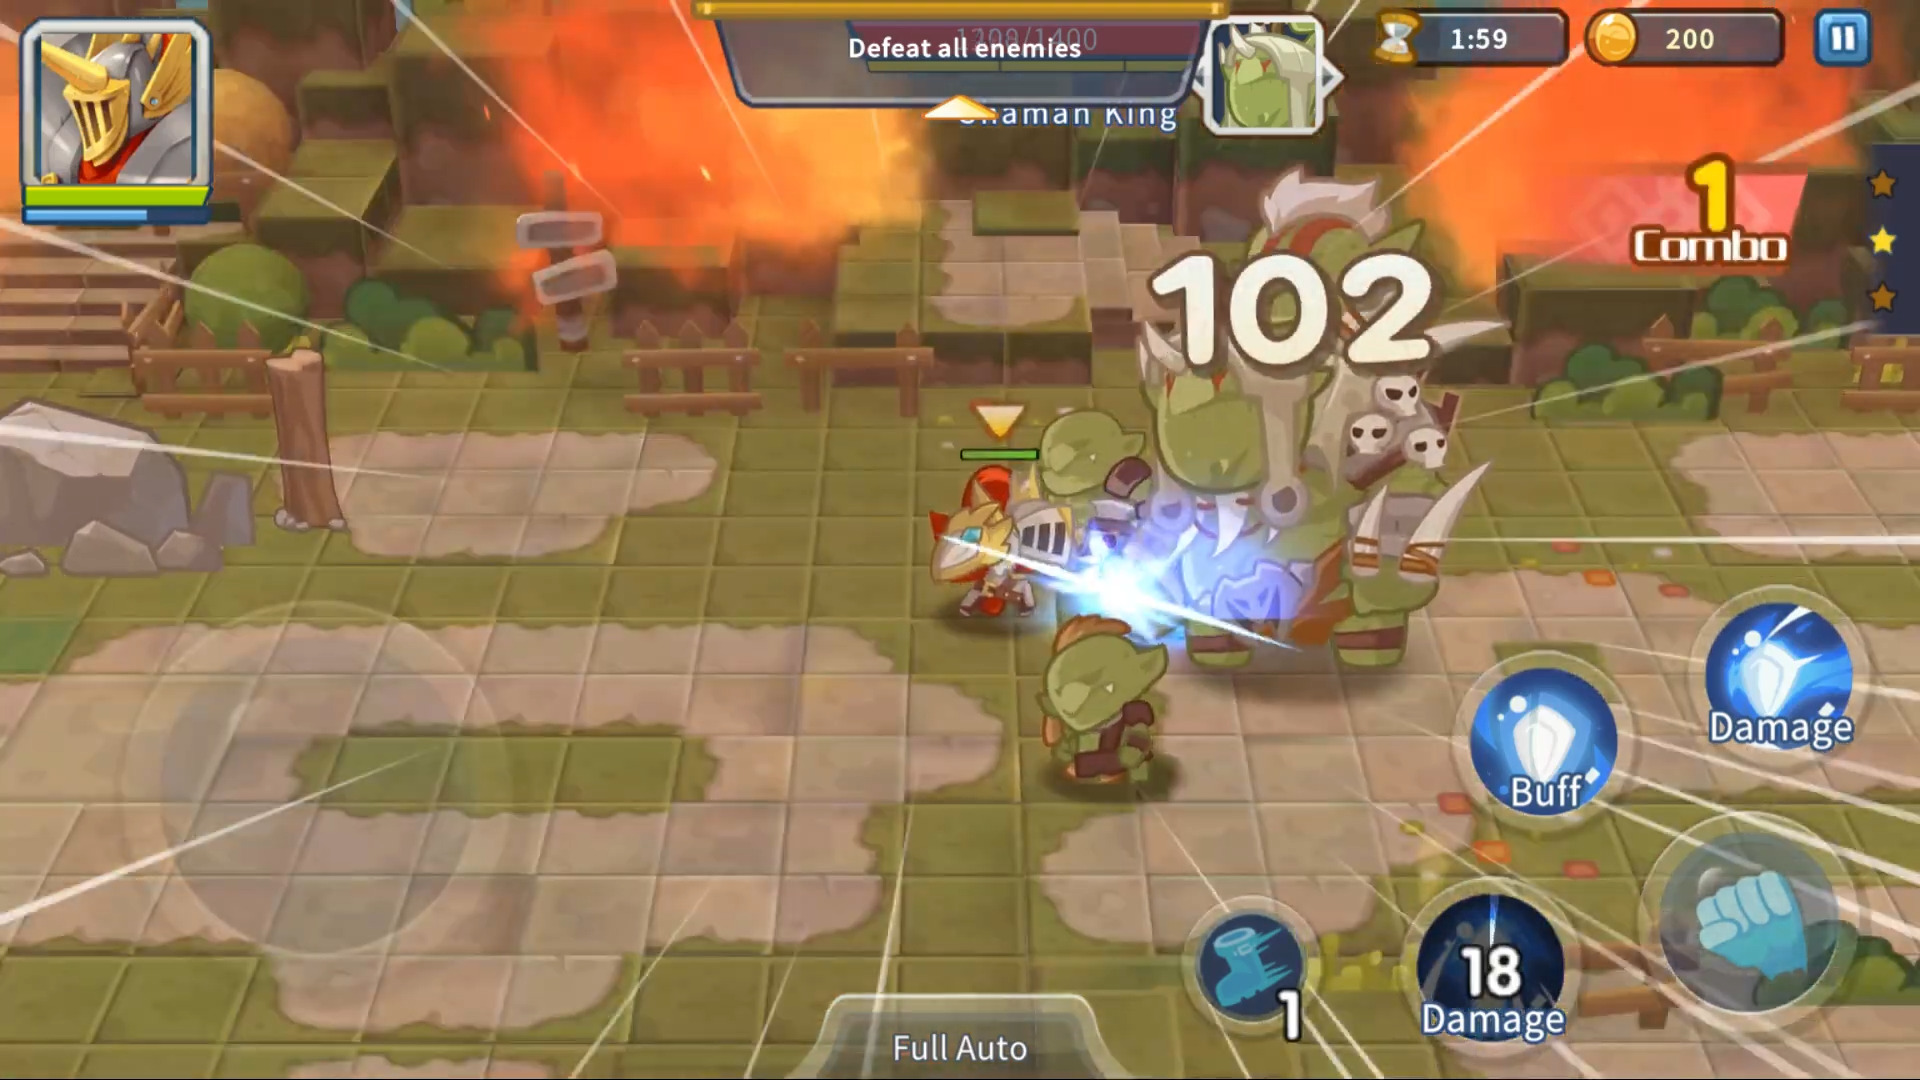 Download Monster Knights - Action RPG Android free game.